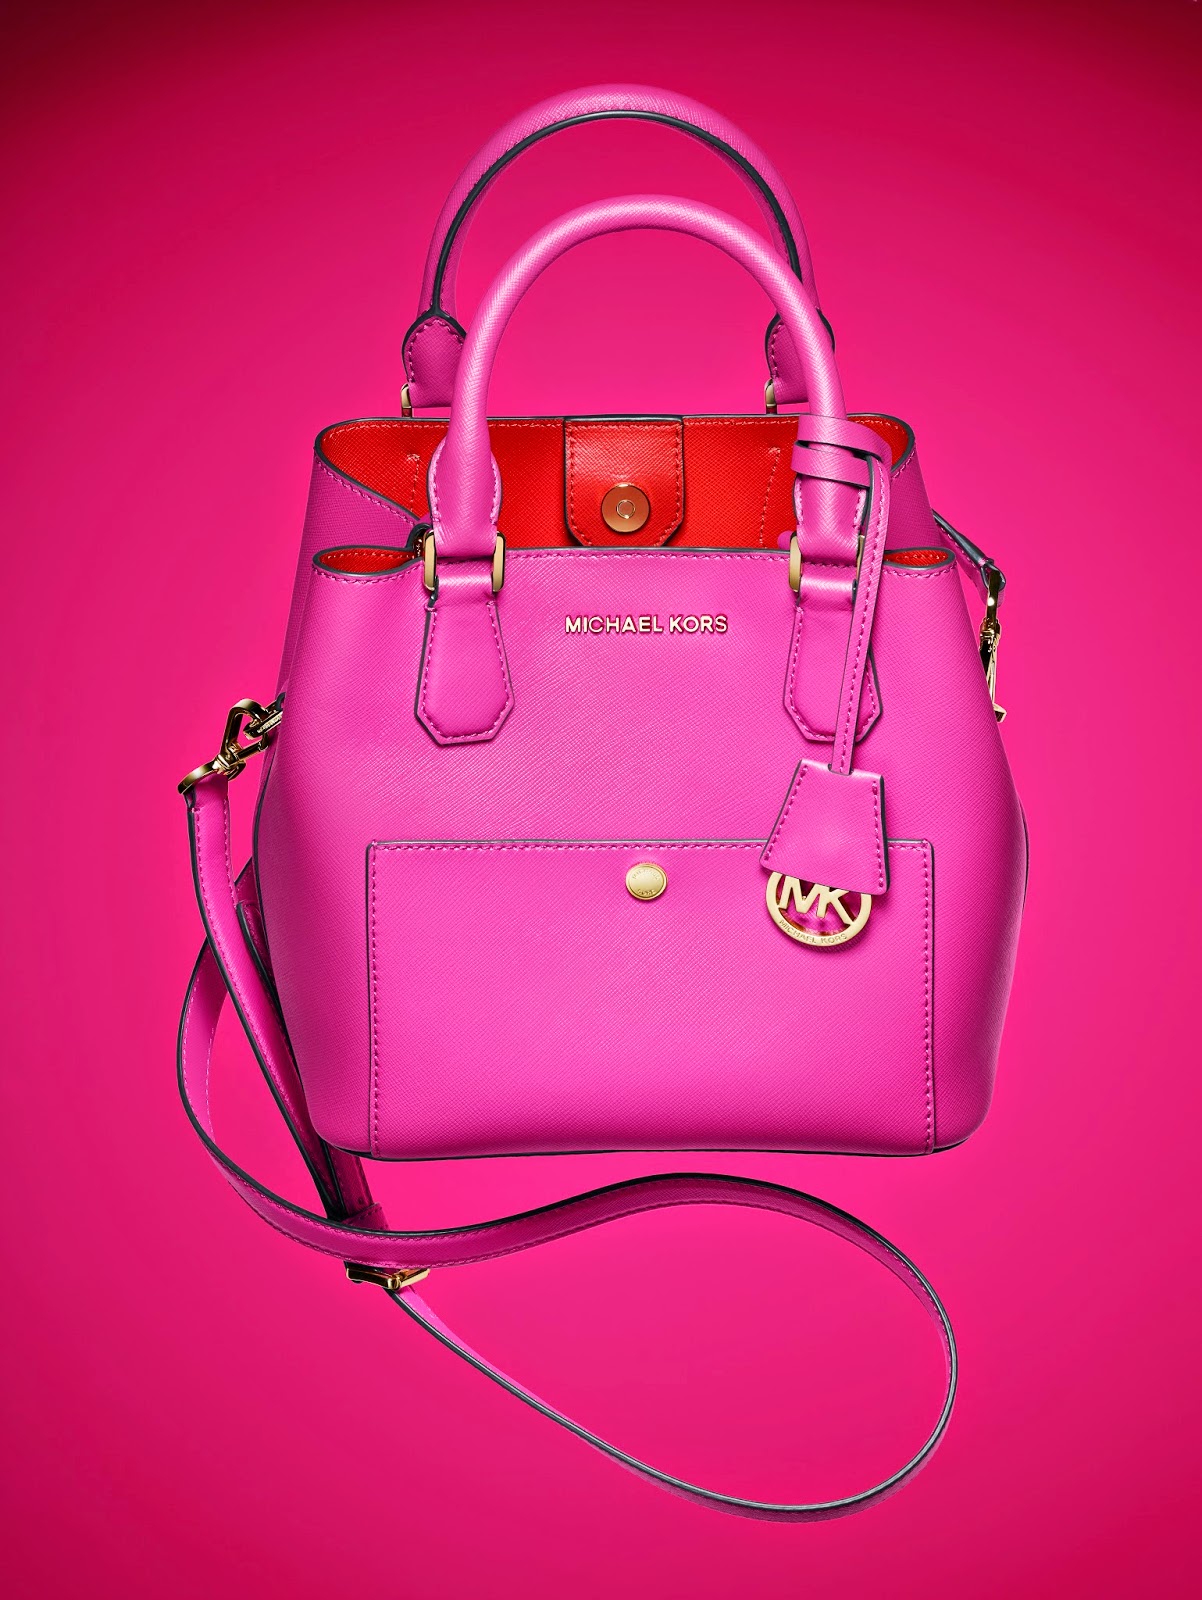 BagAddicts Anonymous: MICHAEL Michael Kors Introduces The Greenwich Bag